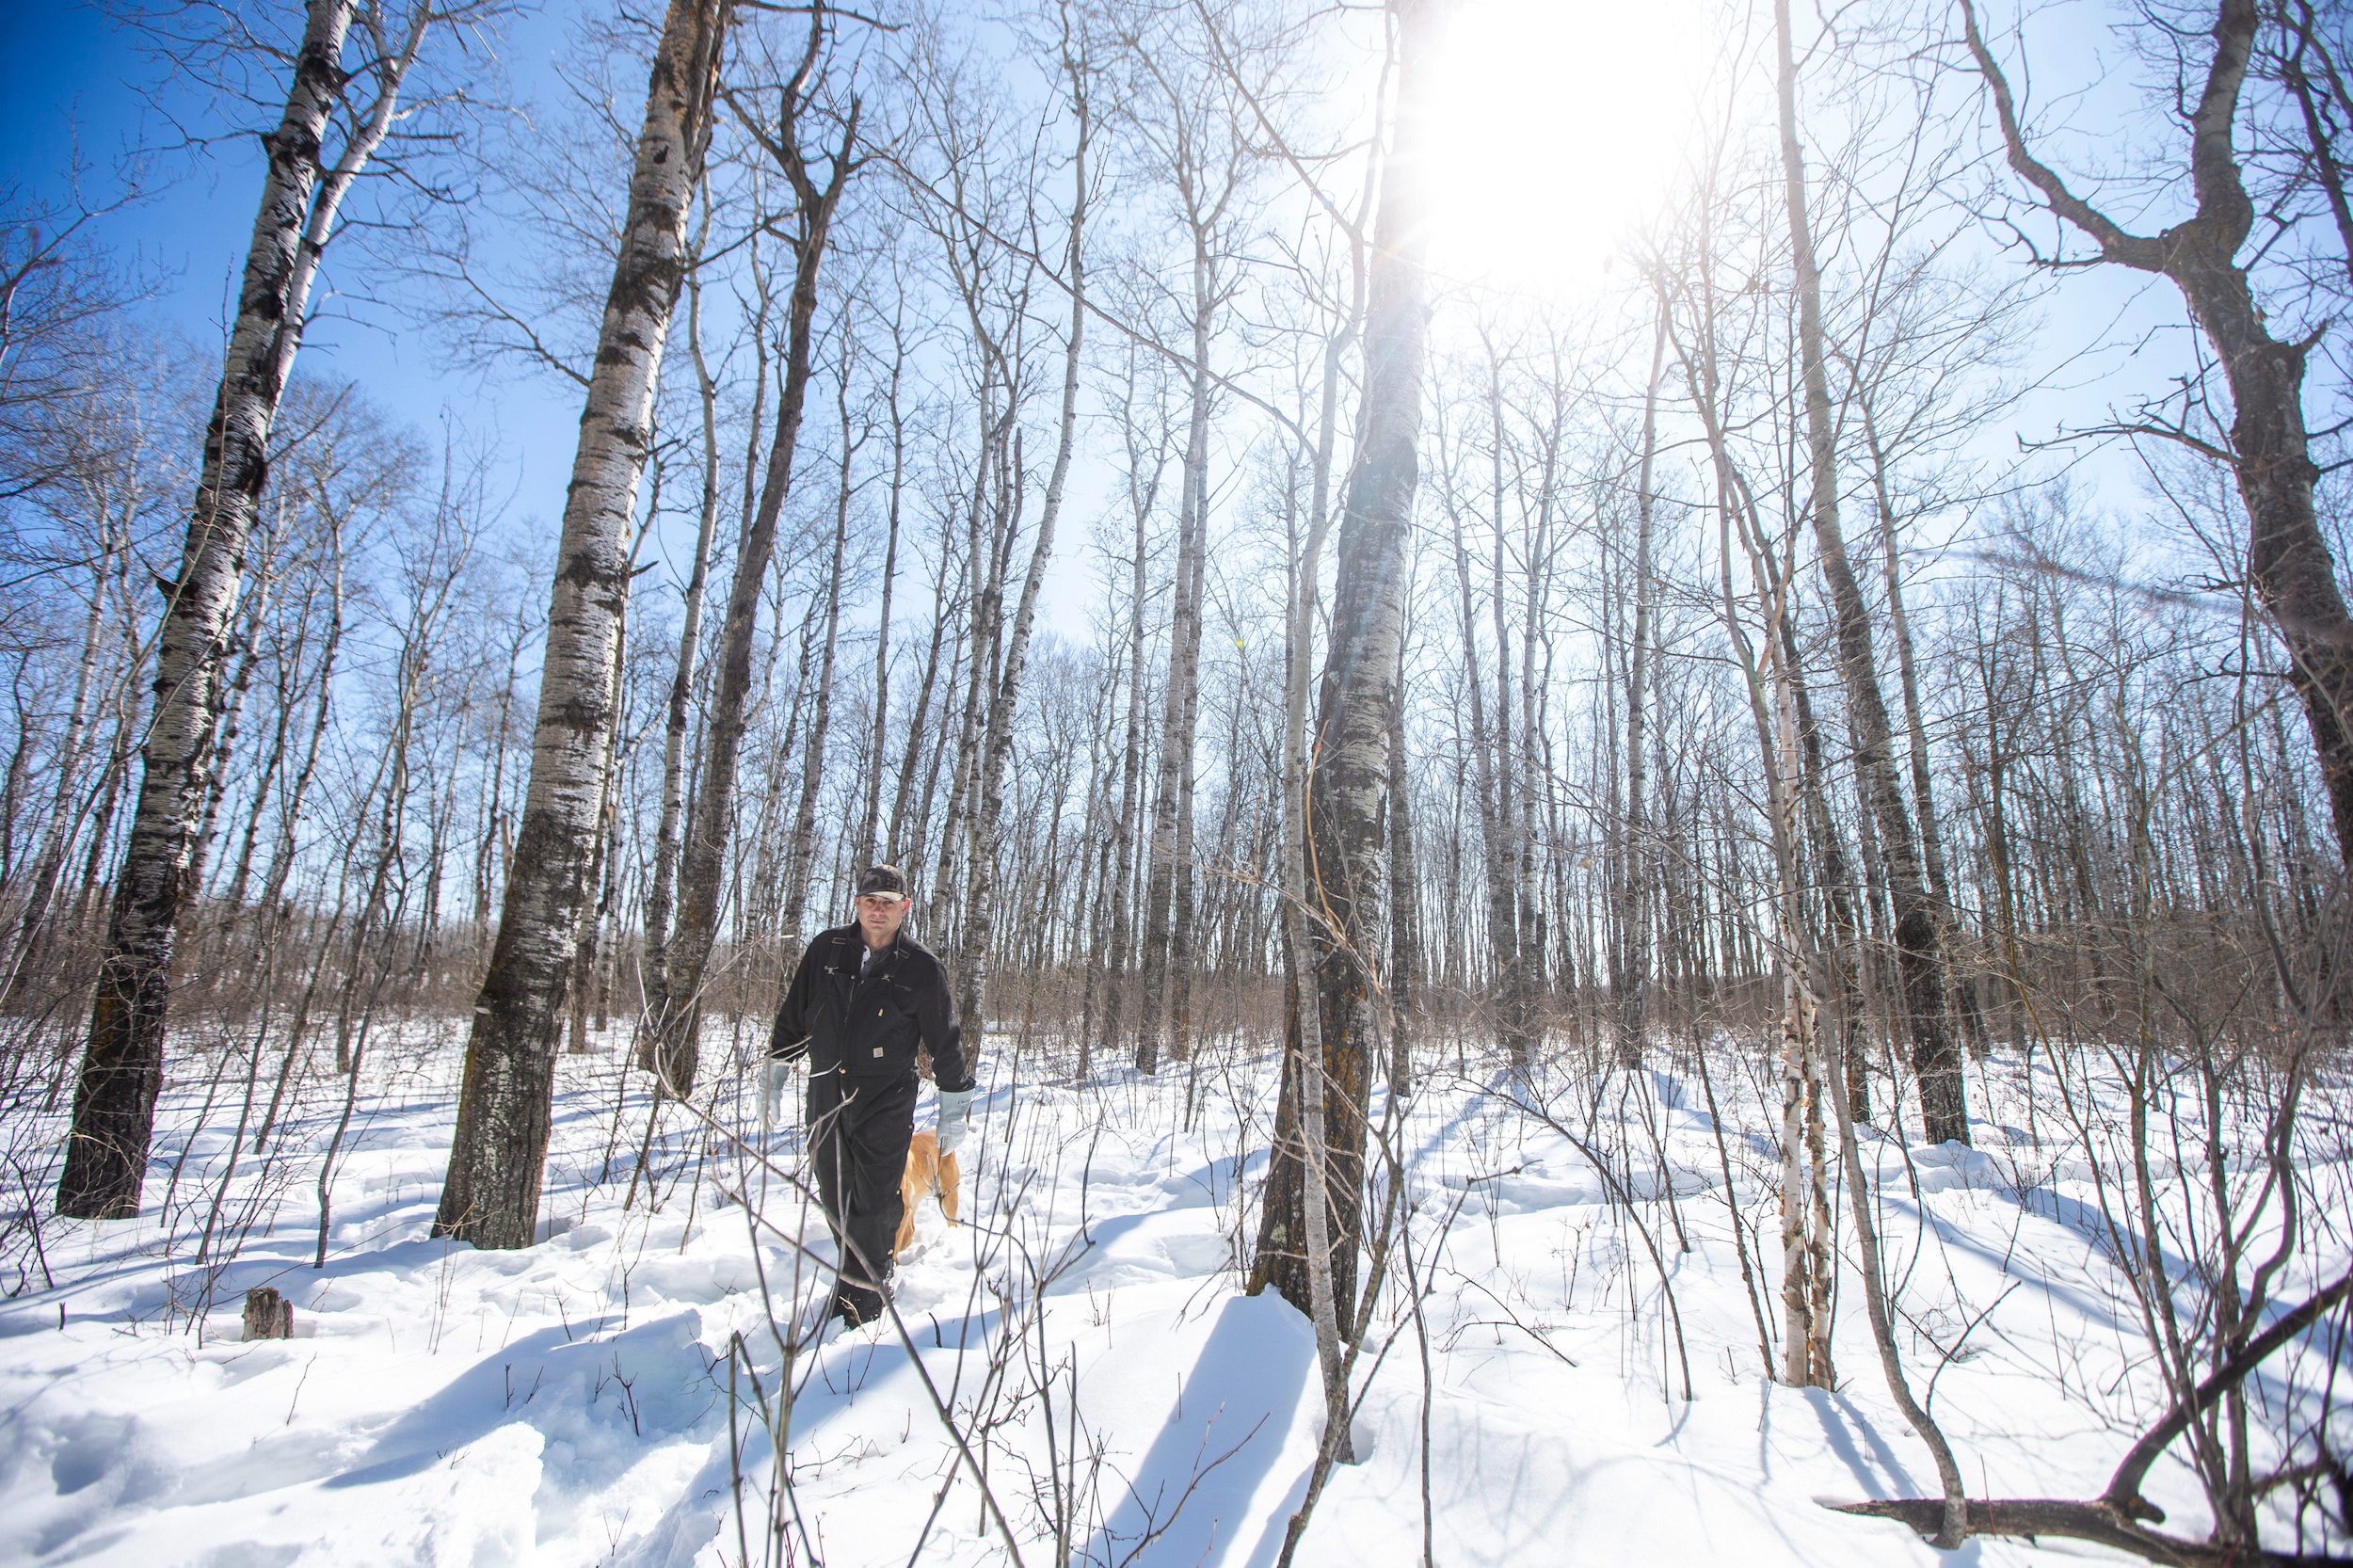 Josh Mustard walks through the snowy forest at the back of his property near Vivian, Manitoba